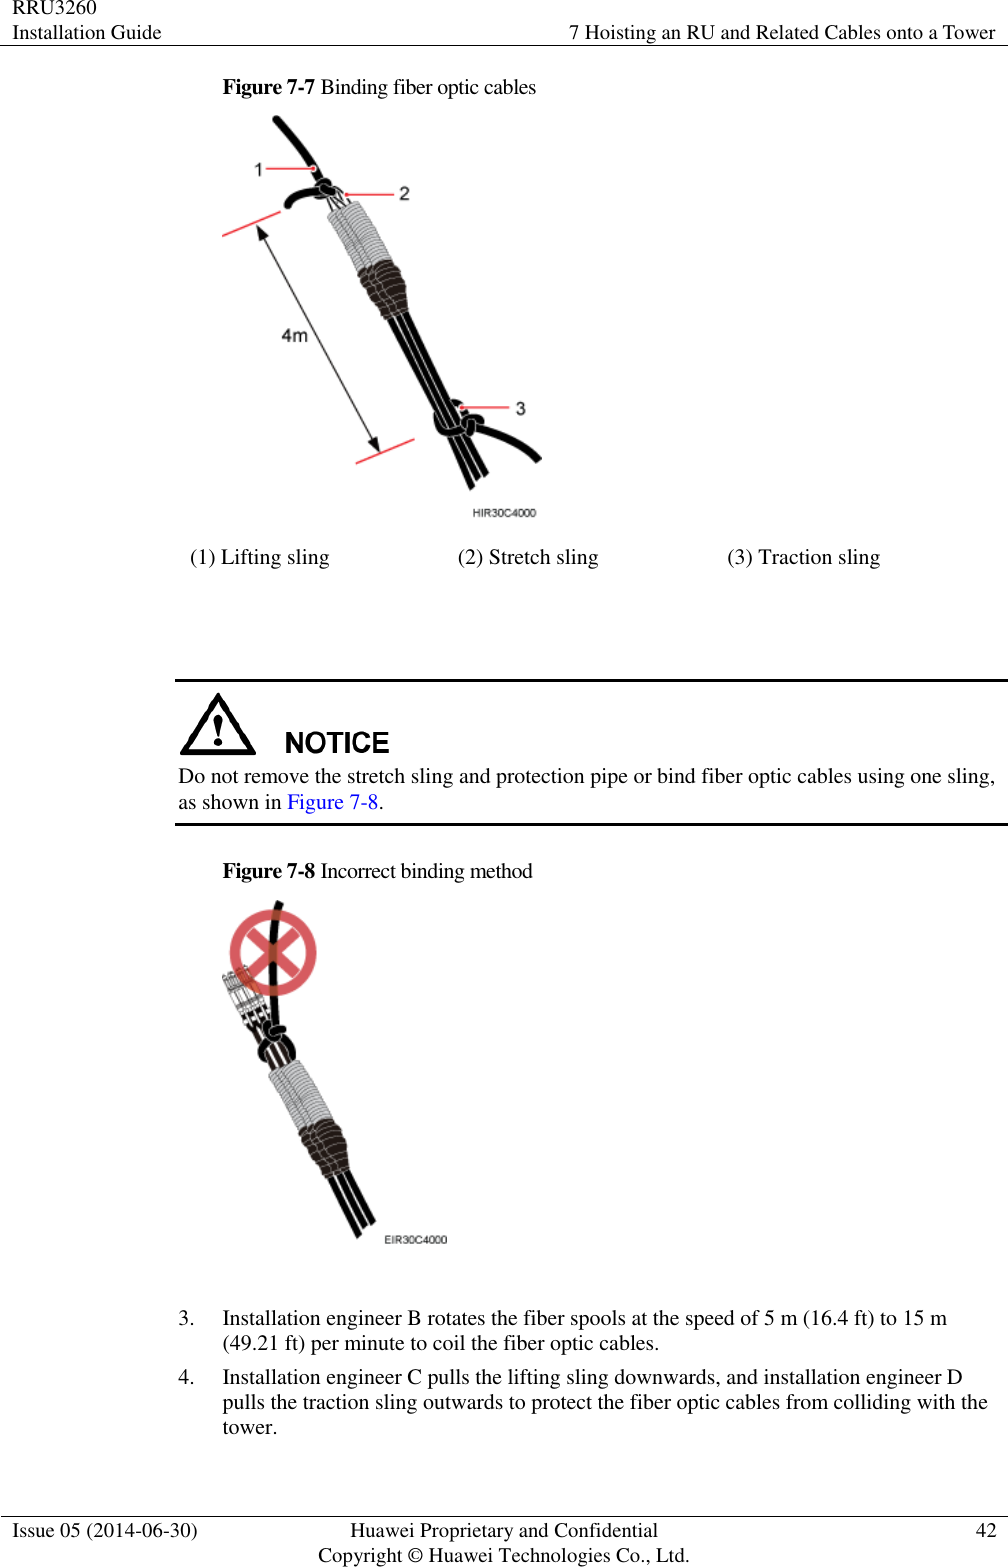 RRU3260 Installation Guide 7 Hoisting an RU and Related Cables onto a Tower  Issue 05 (2014-06-30) Huawei Proprietary and Confidential                                     Copyright © Huawei Technologies Co., Ltd. 42  Figure 7-7 Binding fiber optic cables  (1) Lifting sling (2) Stretch sling (3) Traction sling    Do not remove the stretch sling and protection pipe or bind fiber optic cables using one sling, as shown in Figure 7-8. Figure 7-8 Incorrect binding method   3. Installation engineer B rotates the fiber spools at the speed of 5 m (16.4 ft) to 15 m (49.21 ft) per minute to coil the fiber optic cables. 4. Installation engineer C pulls the lifting sling downwards, and installation engineer D pulls the traction sling outwards to protect the fiber optic cables from colliding with the tower. 